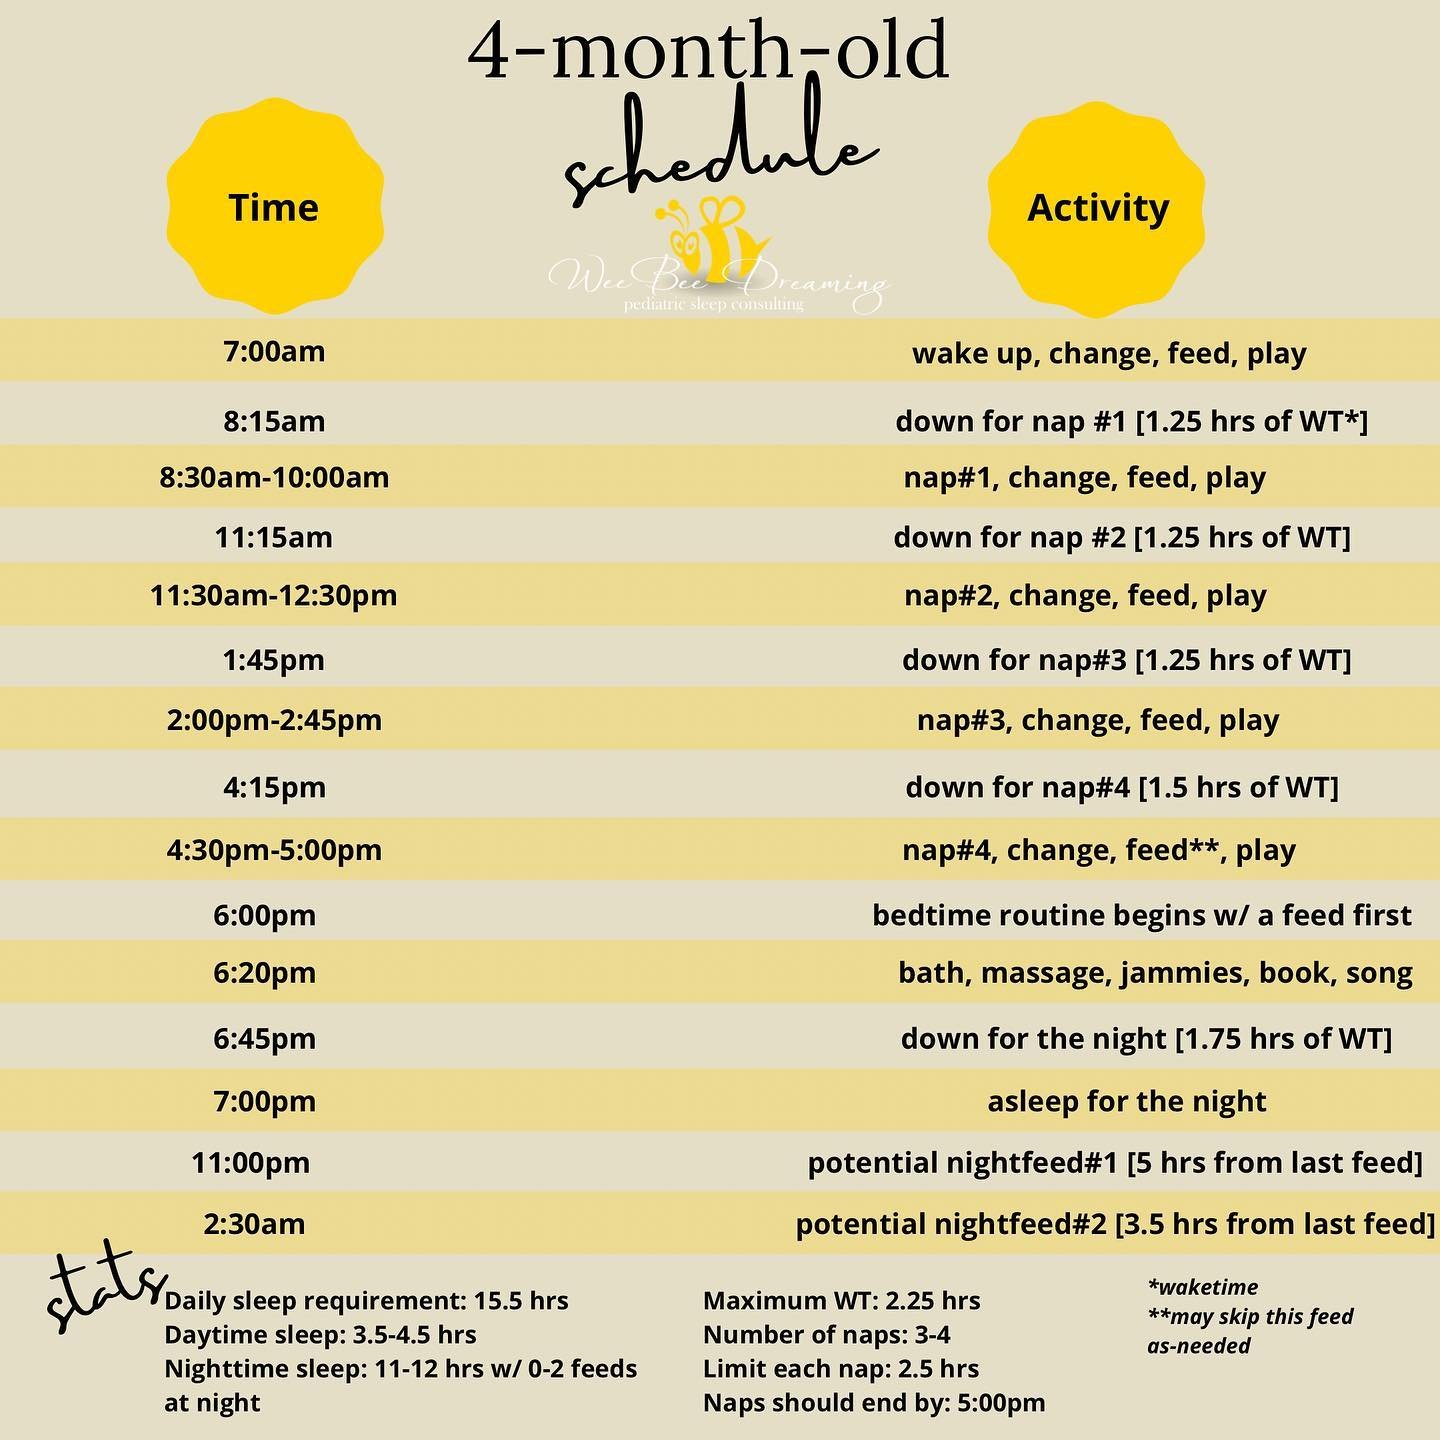 5 month old baby feeding schedule: How much should a 5 month old eat?